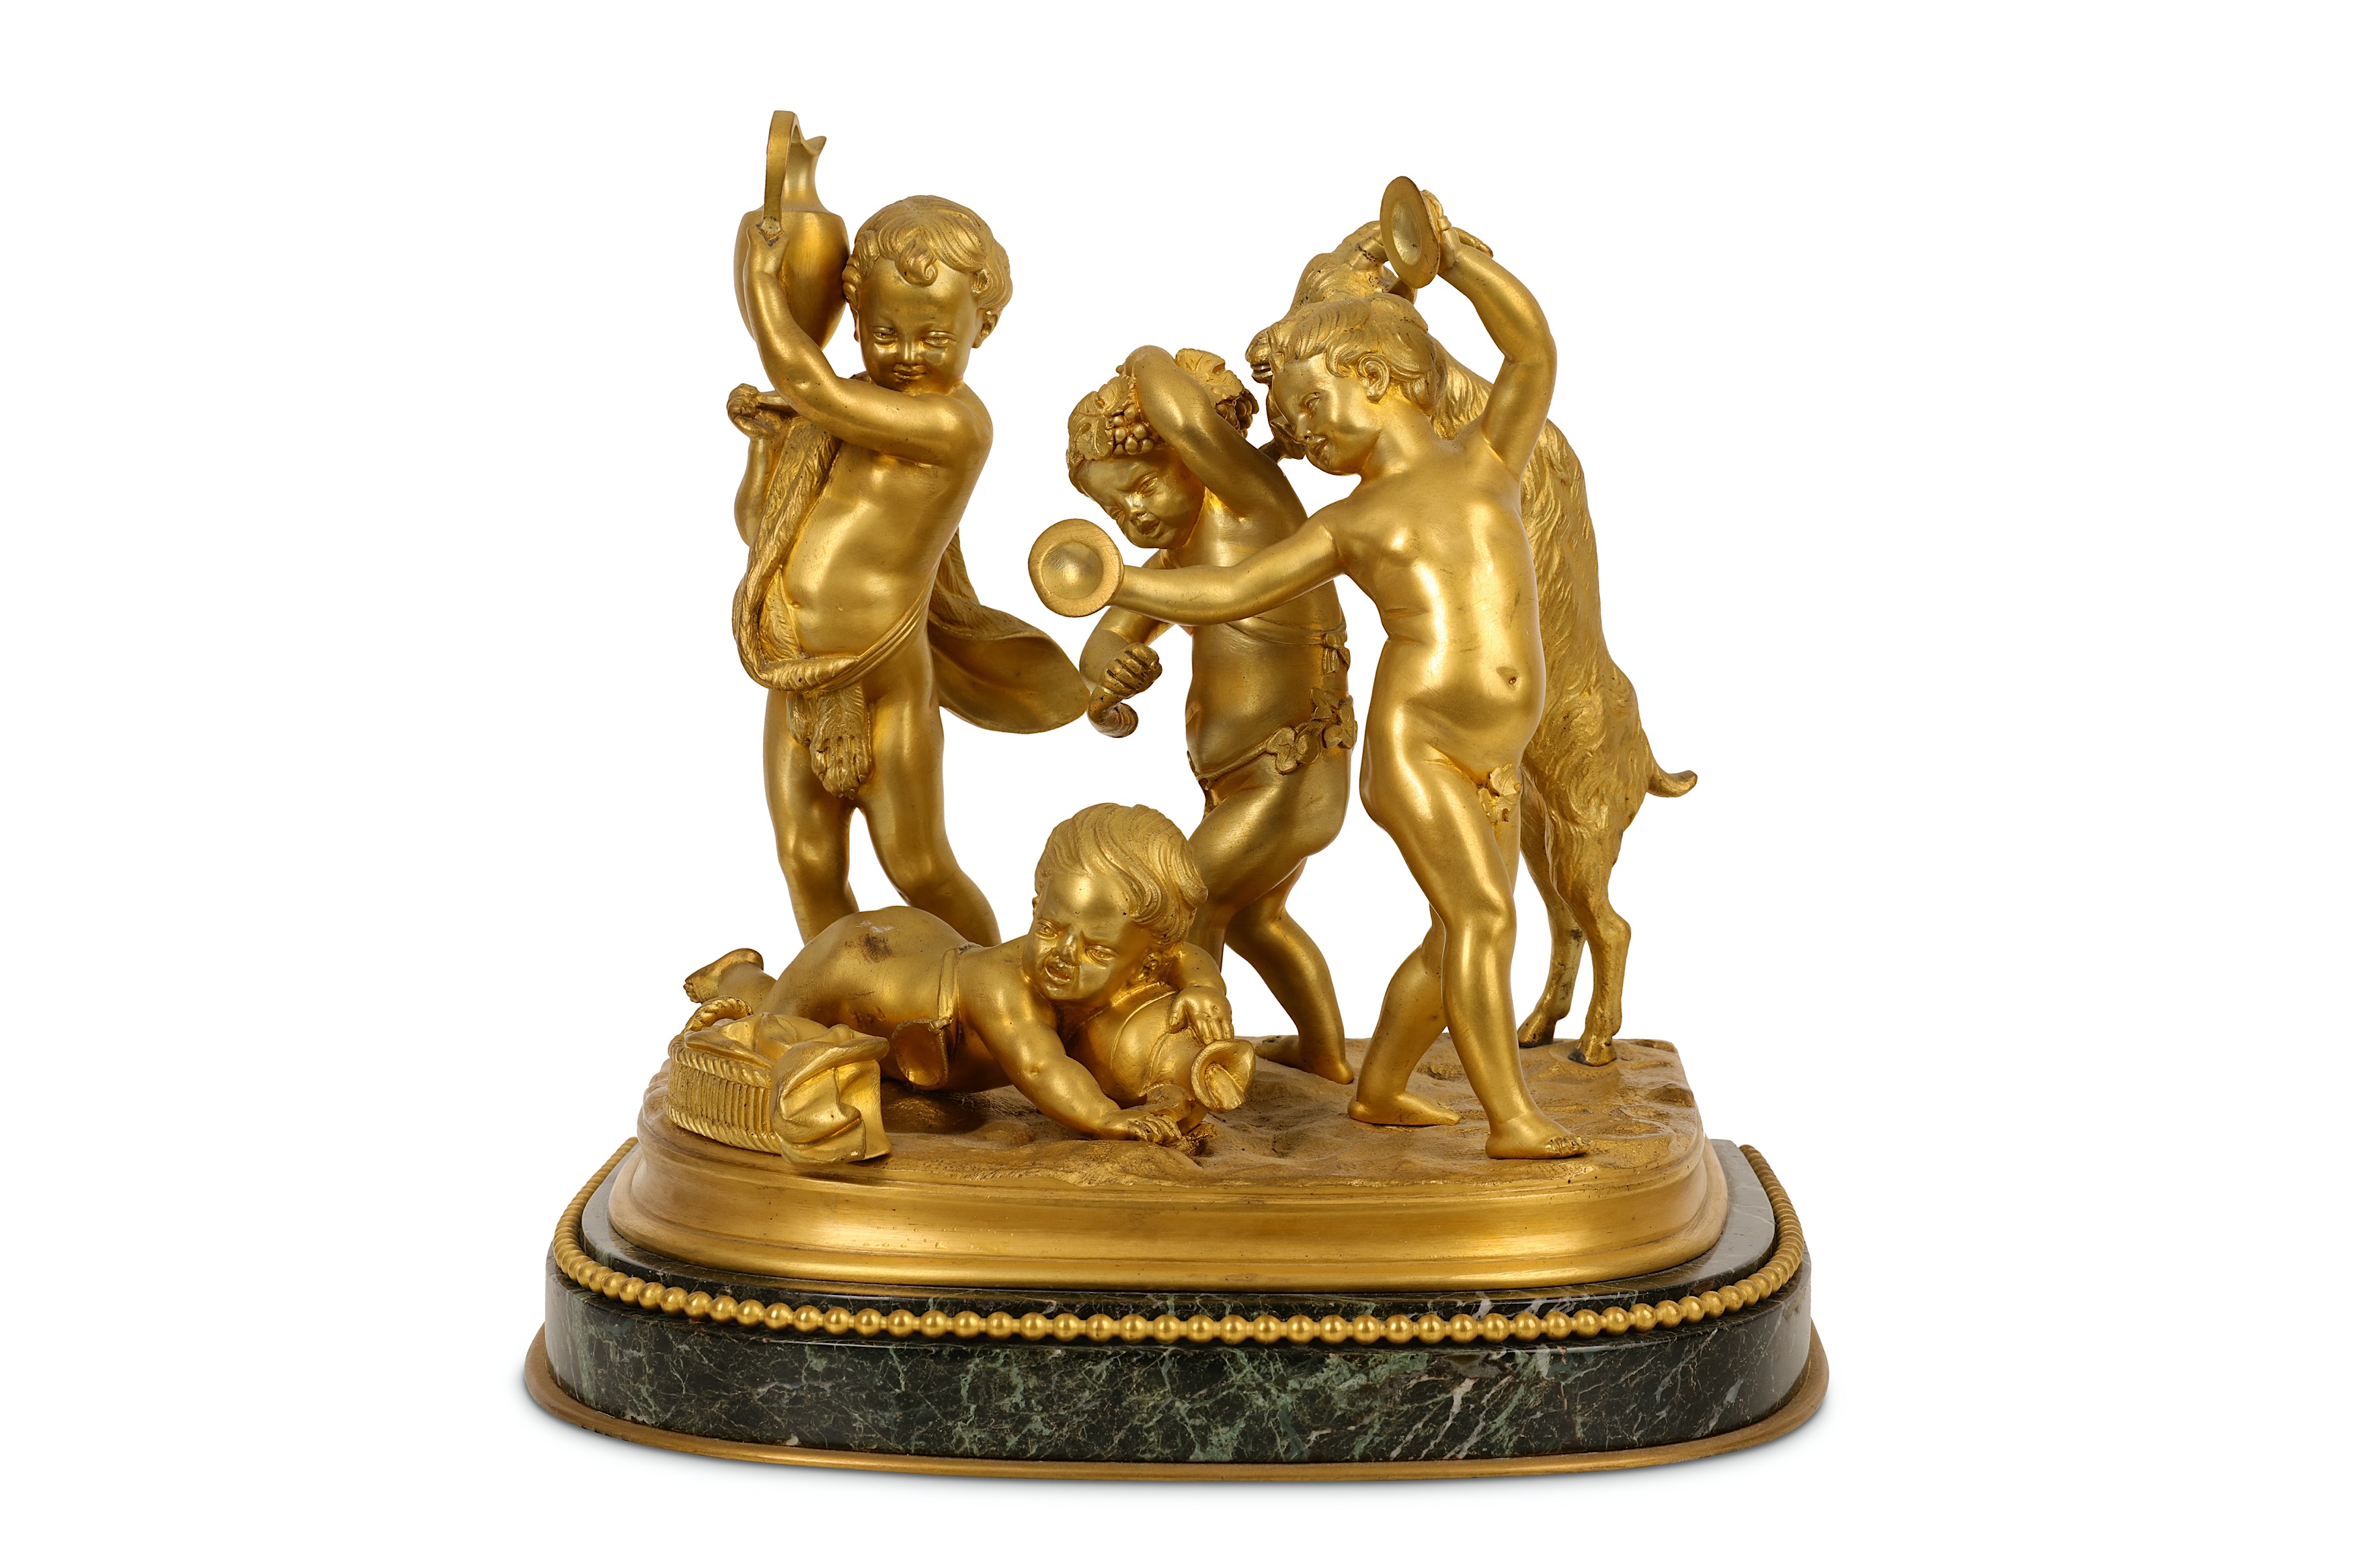 A FINE LATE 19TH CENTURY FRENCH GILT BRONZE FIGURAL GROUP OF PUTTI AND A GOAT SIGNED 'SEVRES' with